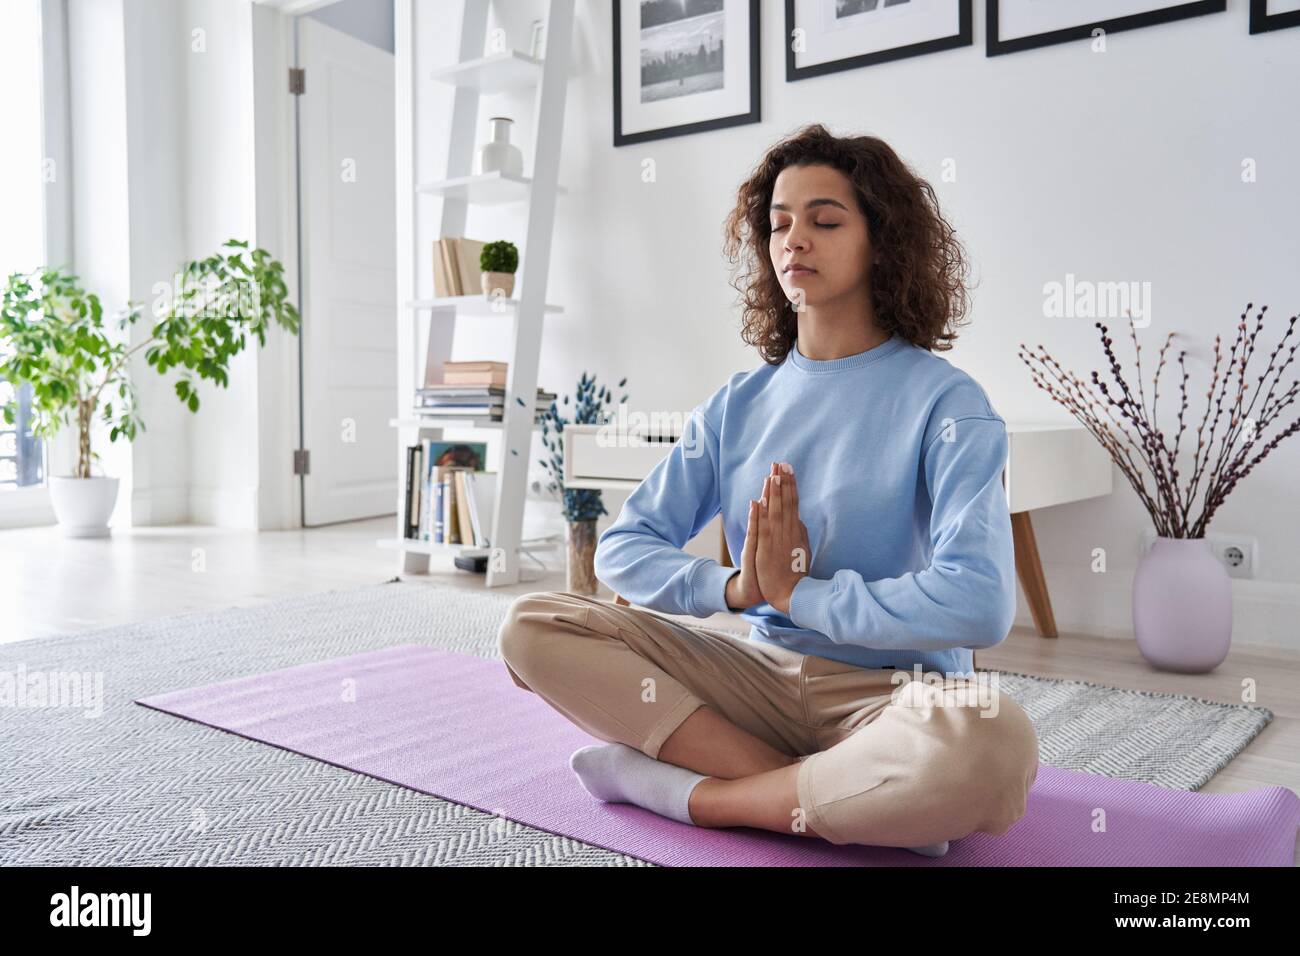 Serene healthy young woman meditating at home doing yoga breathing exercise. Stock Photo